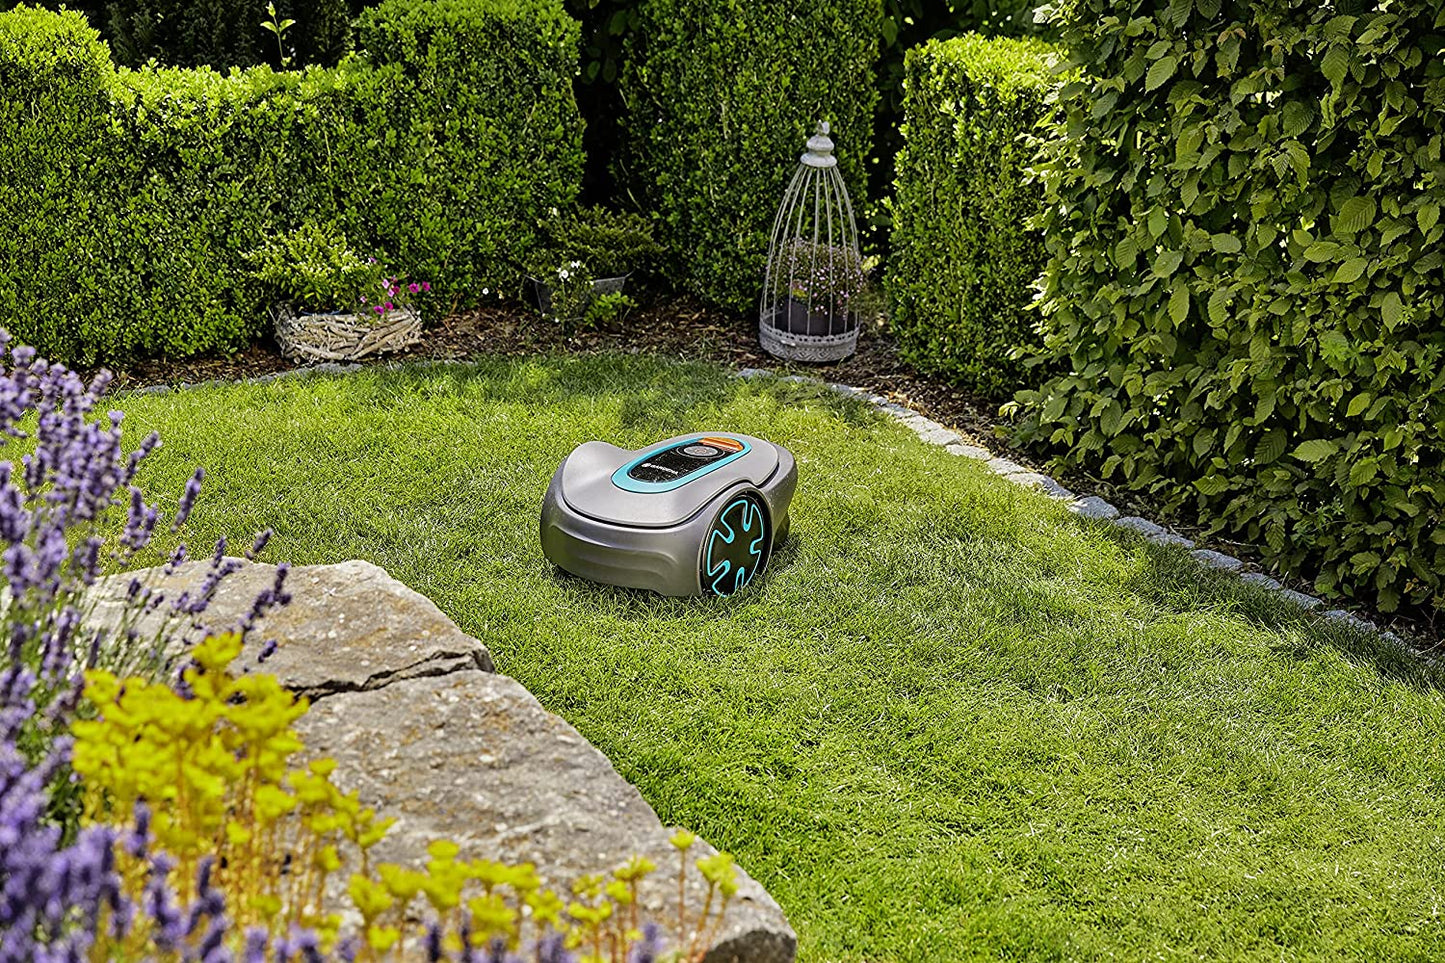 A robotic lawn mover resting on a green lawn.